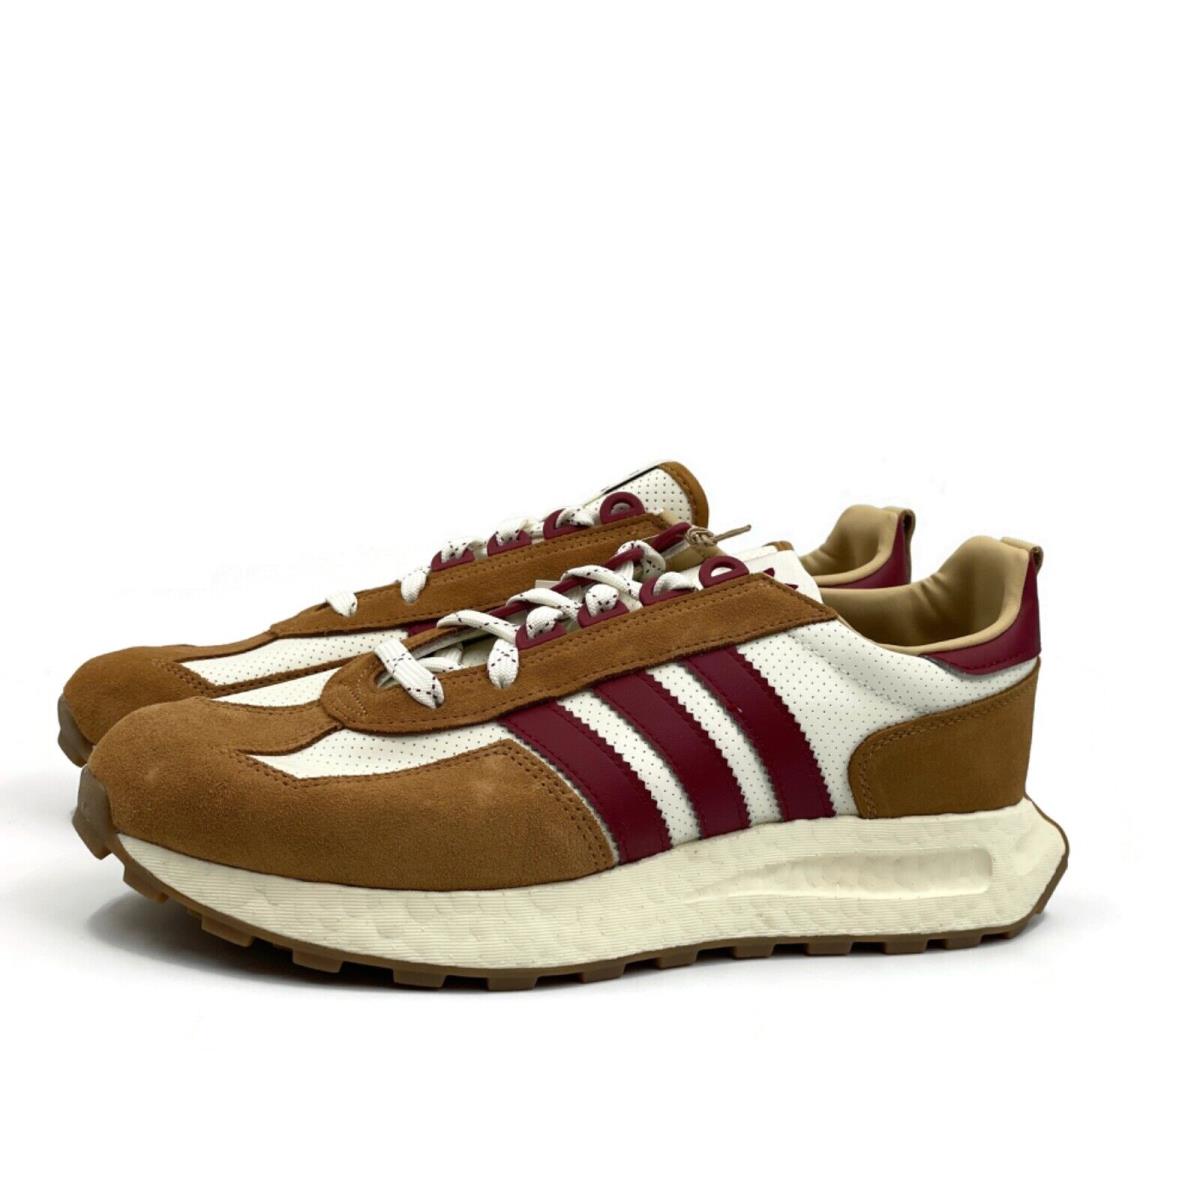 Adidas shoes Retropy - White Red Brown Beige 8